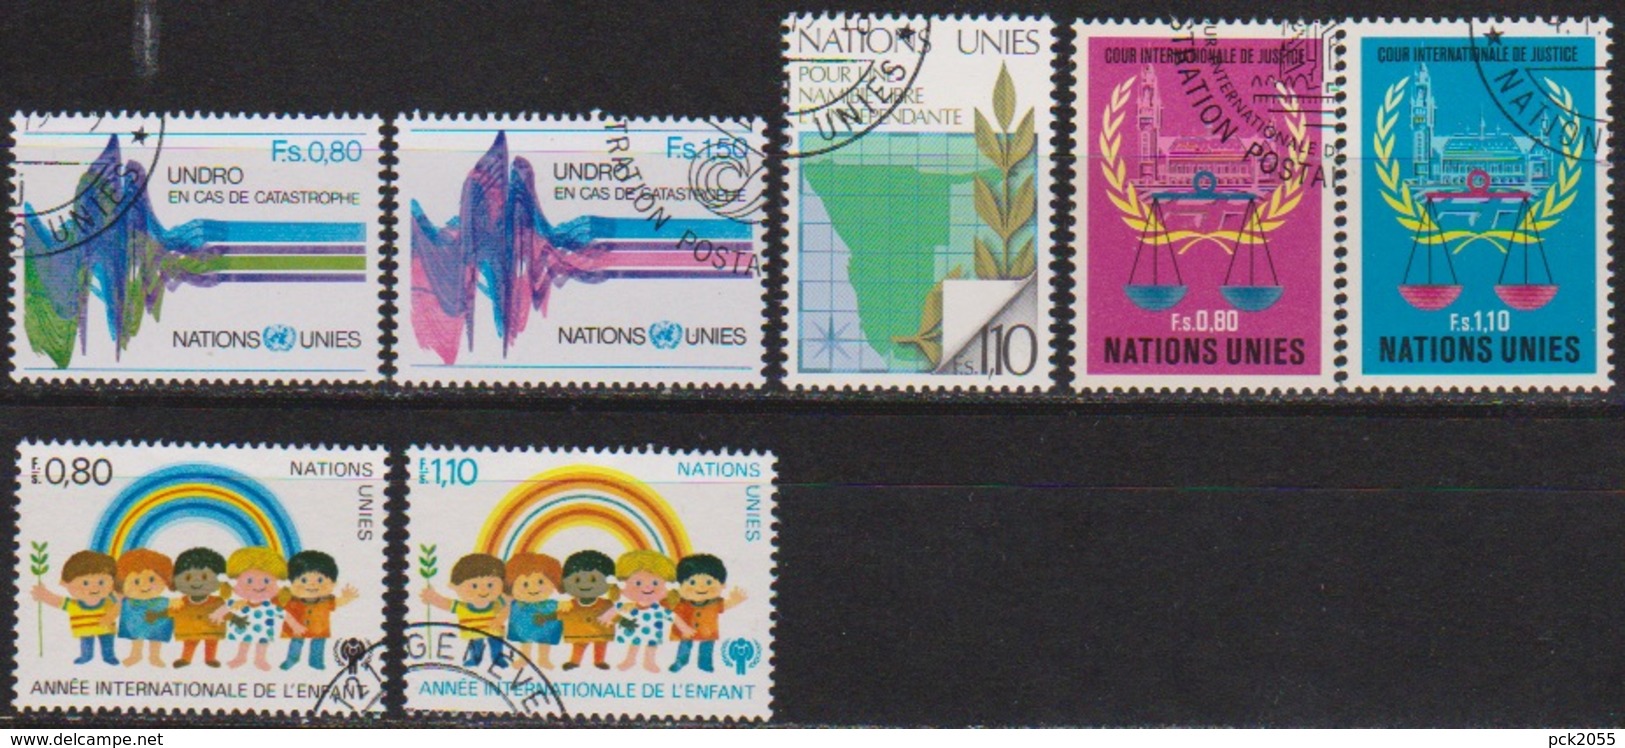 UNO Genf 1979 MiNr.81 - 87 O  Gest. Jahrgang 1979 Komplett ( 4012  ) - Used Stamps